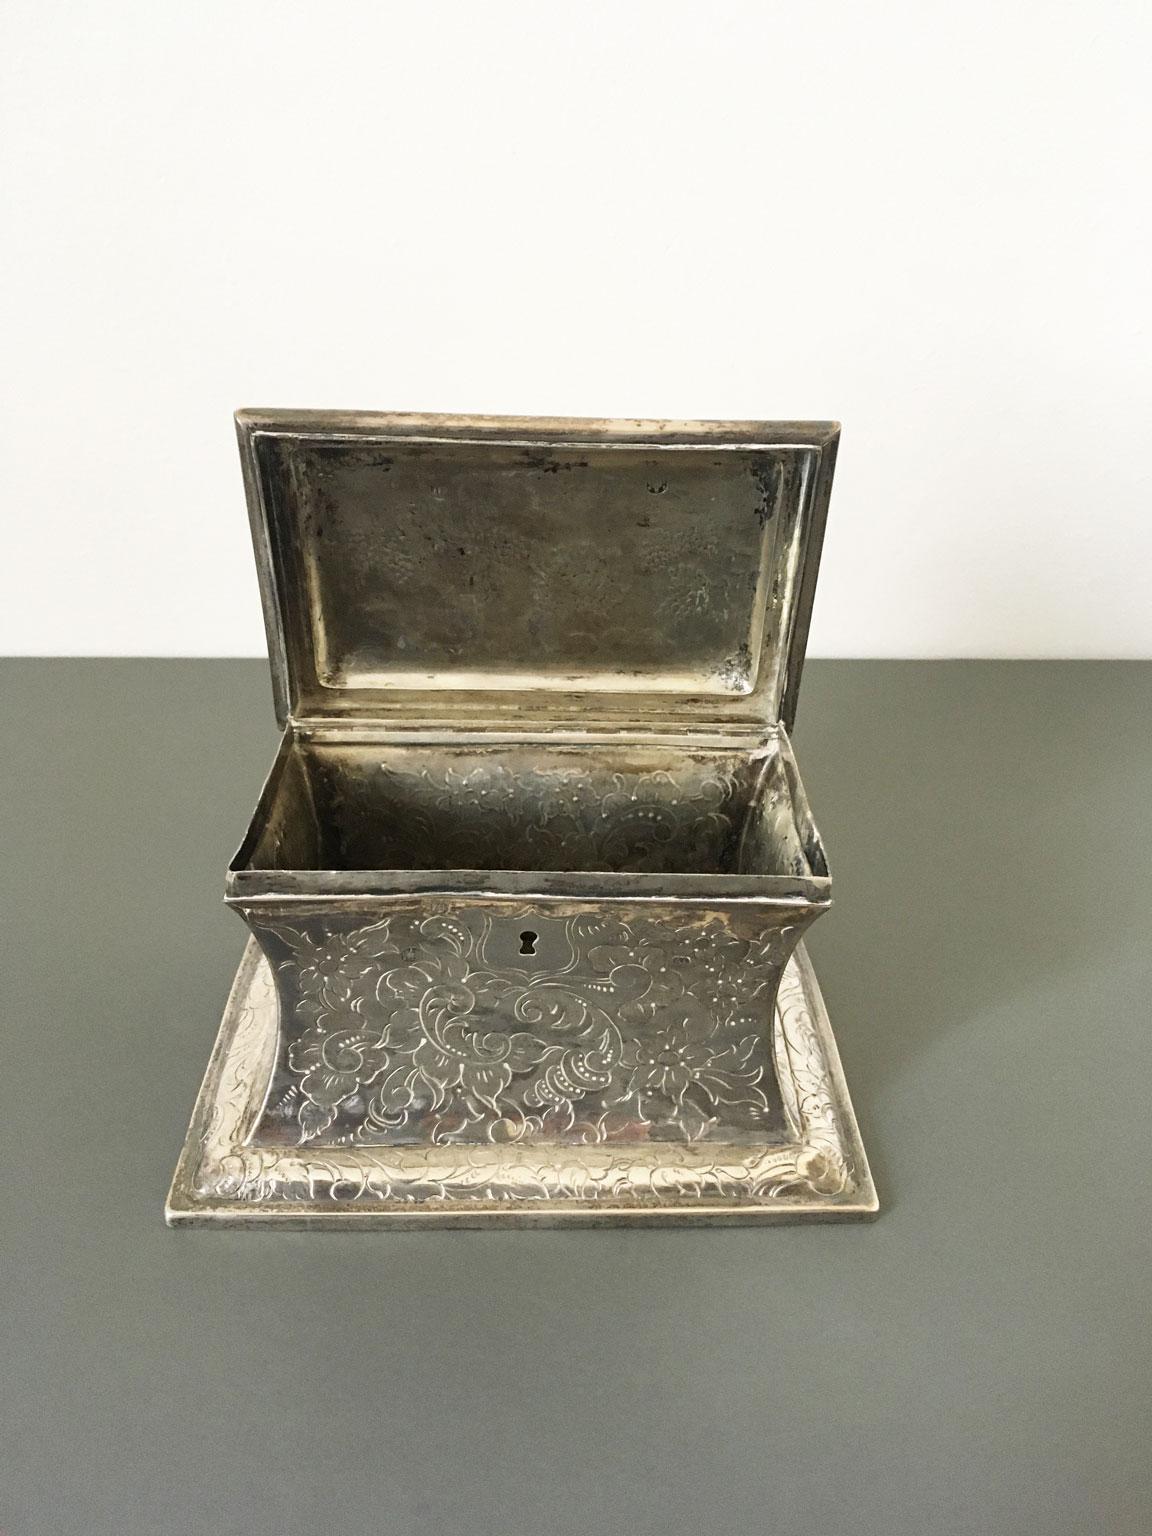 Mid-18th Century German Engraved Sterking Silver Box For Sale 2